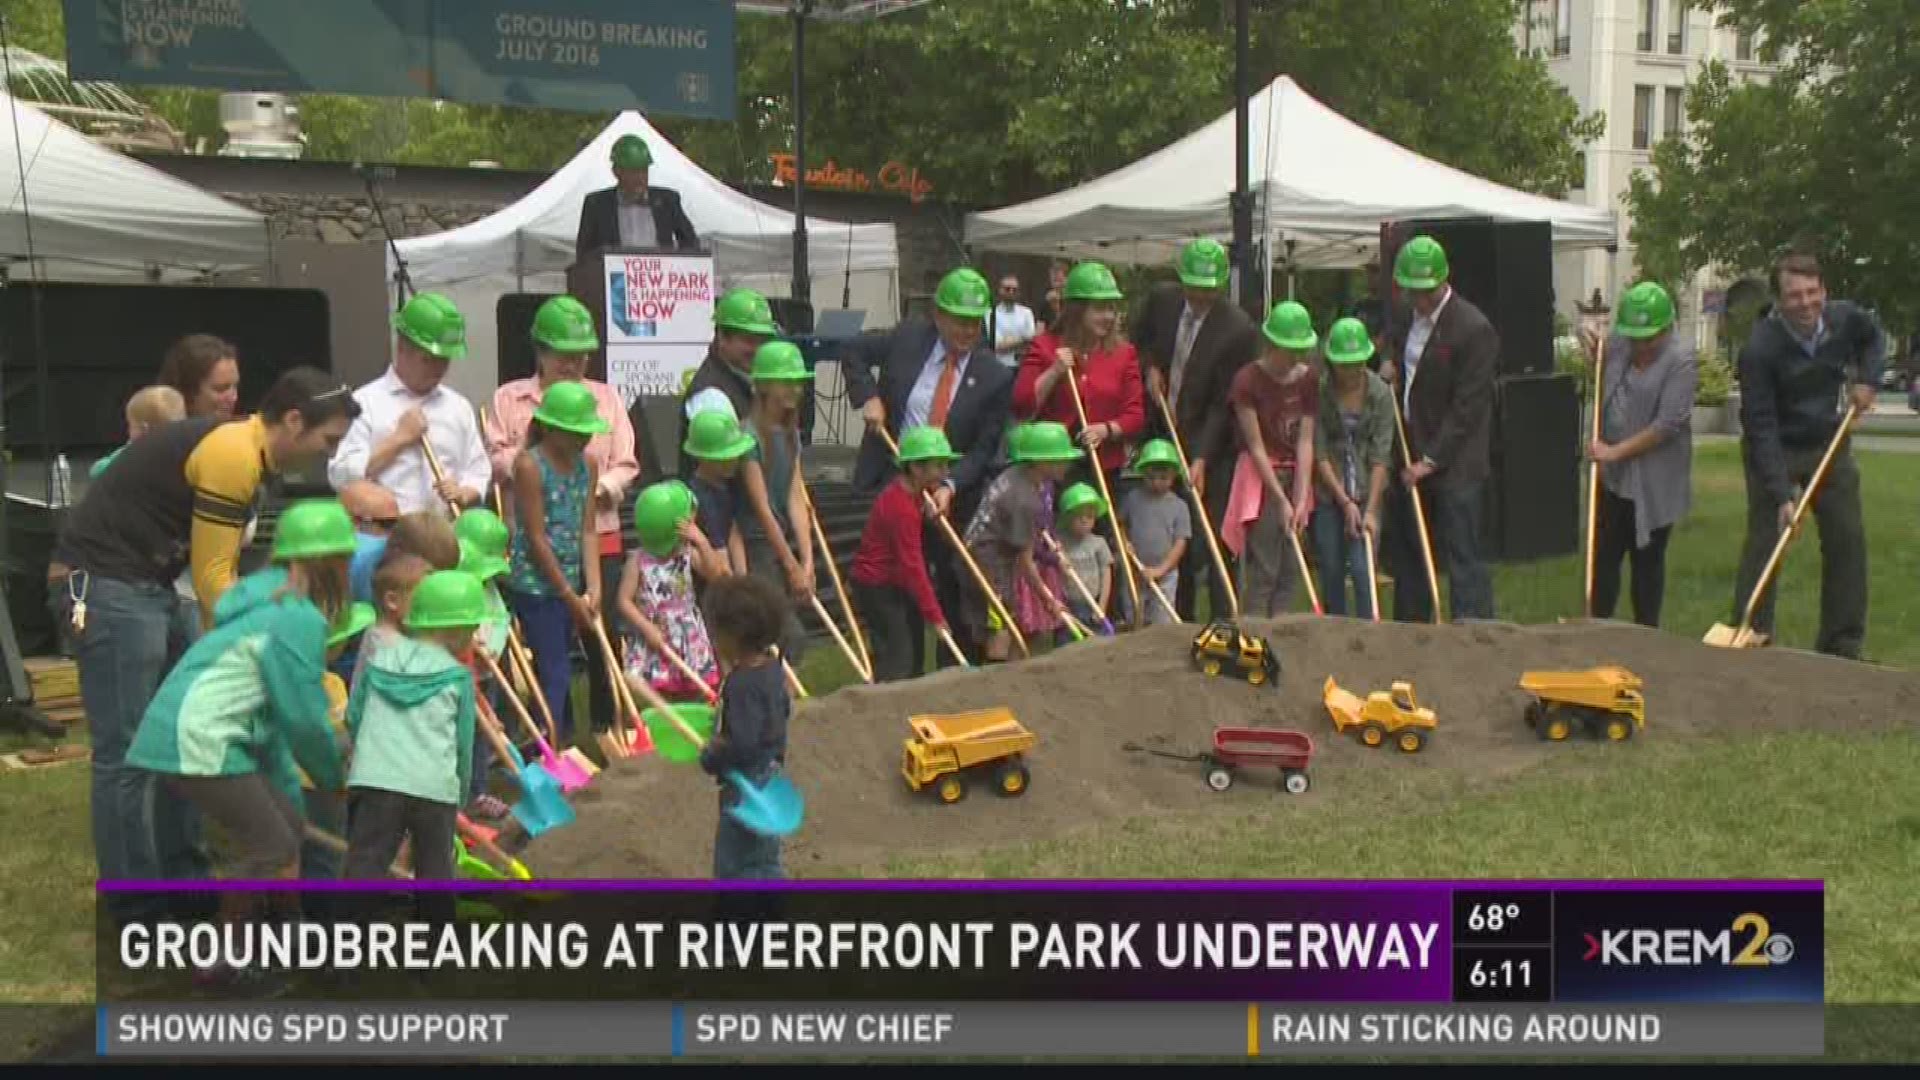 On Friday, the groundbreaking for the revamped Riverfront Park is underway and expected to draw thousands out to the park tonight.